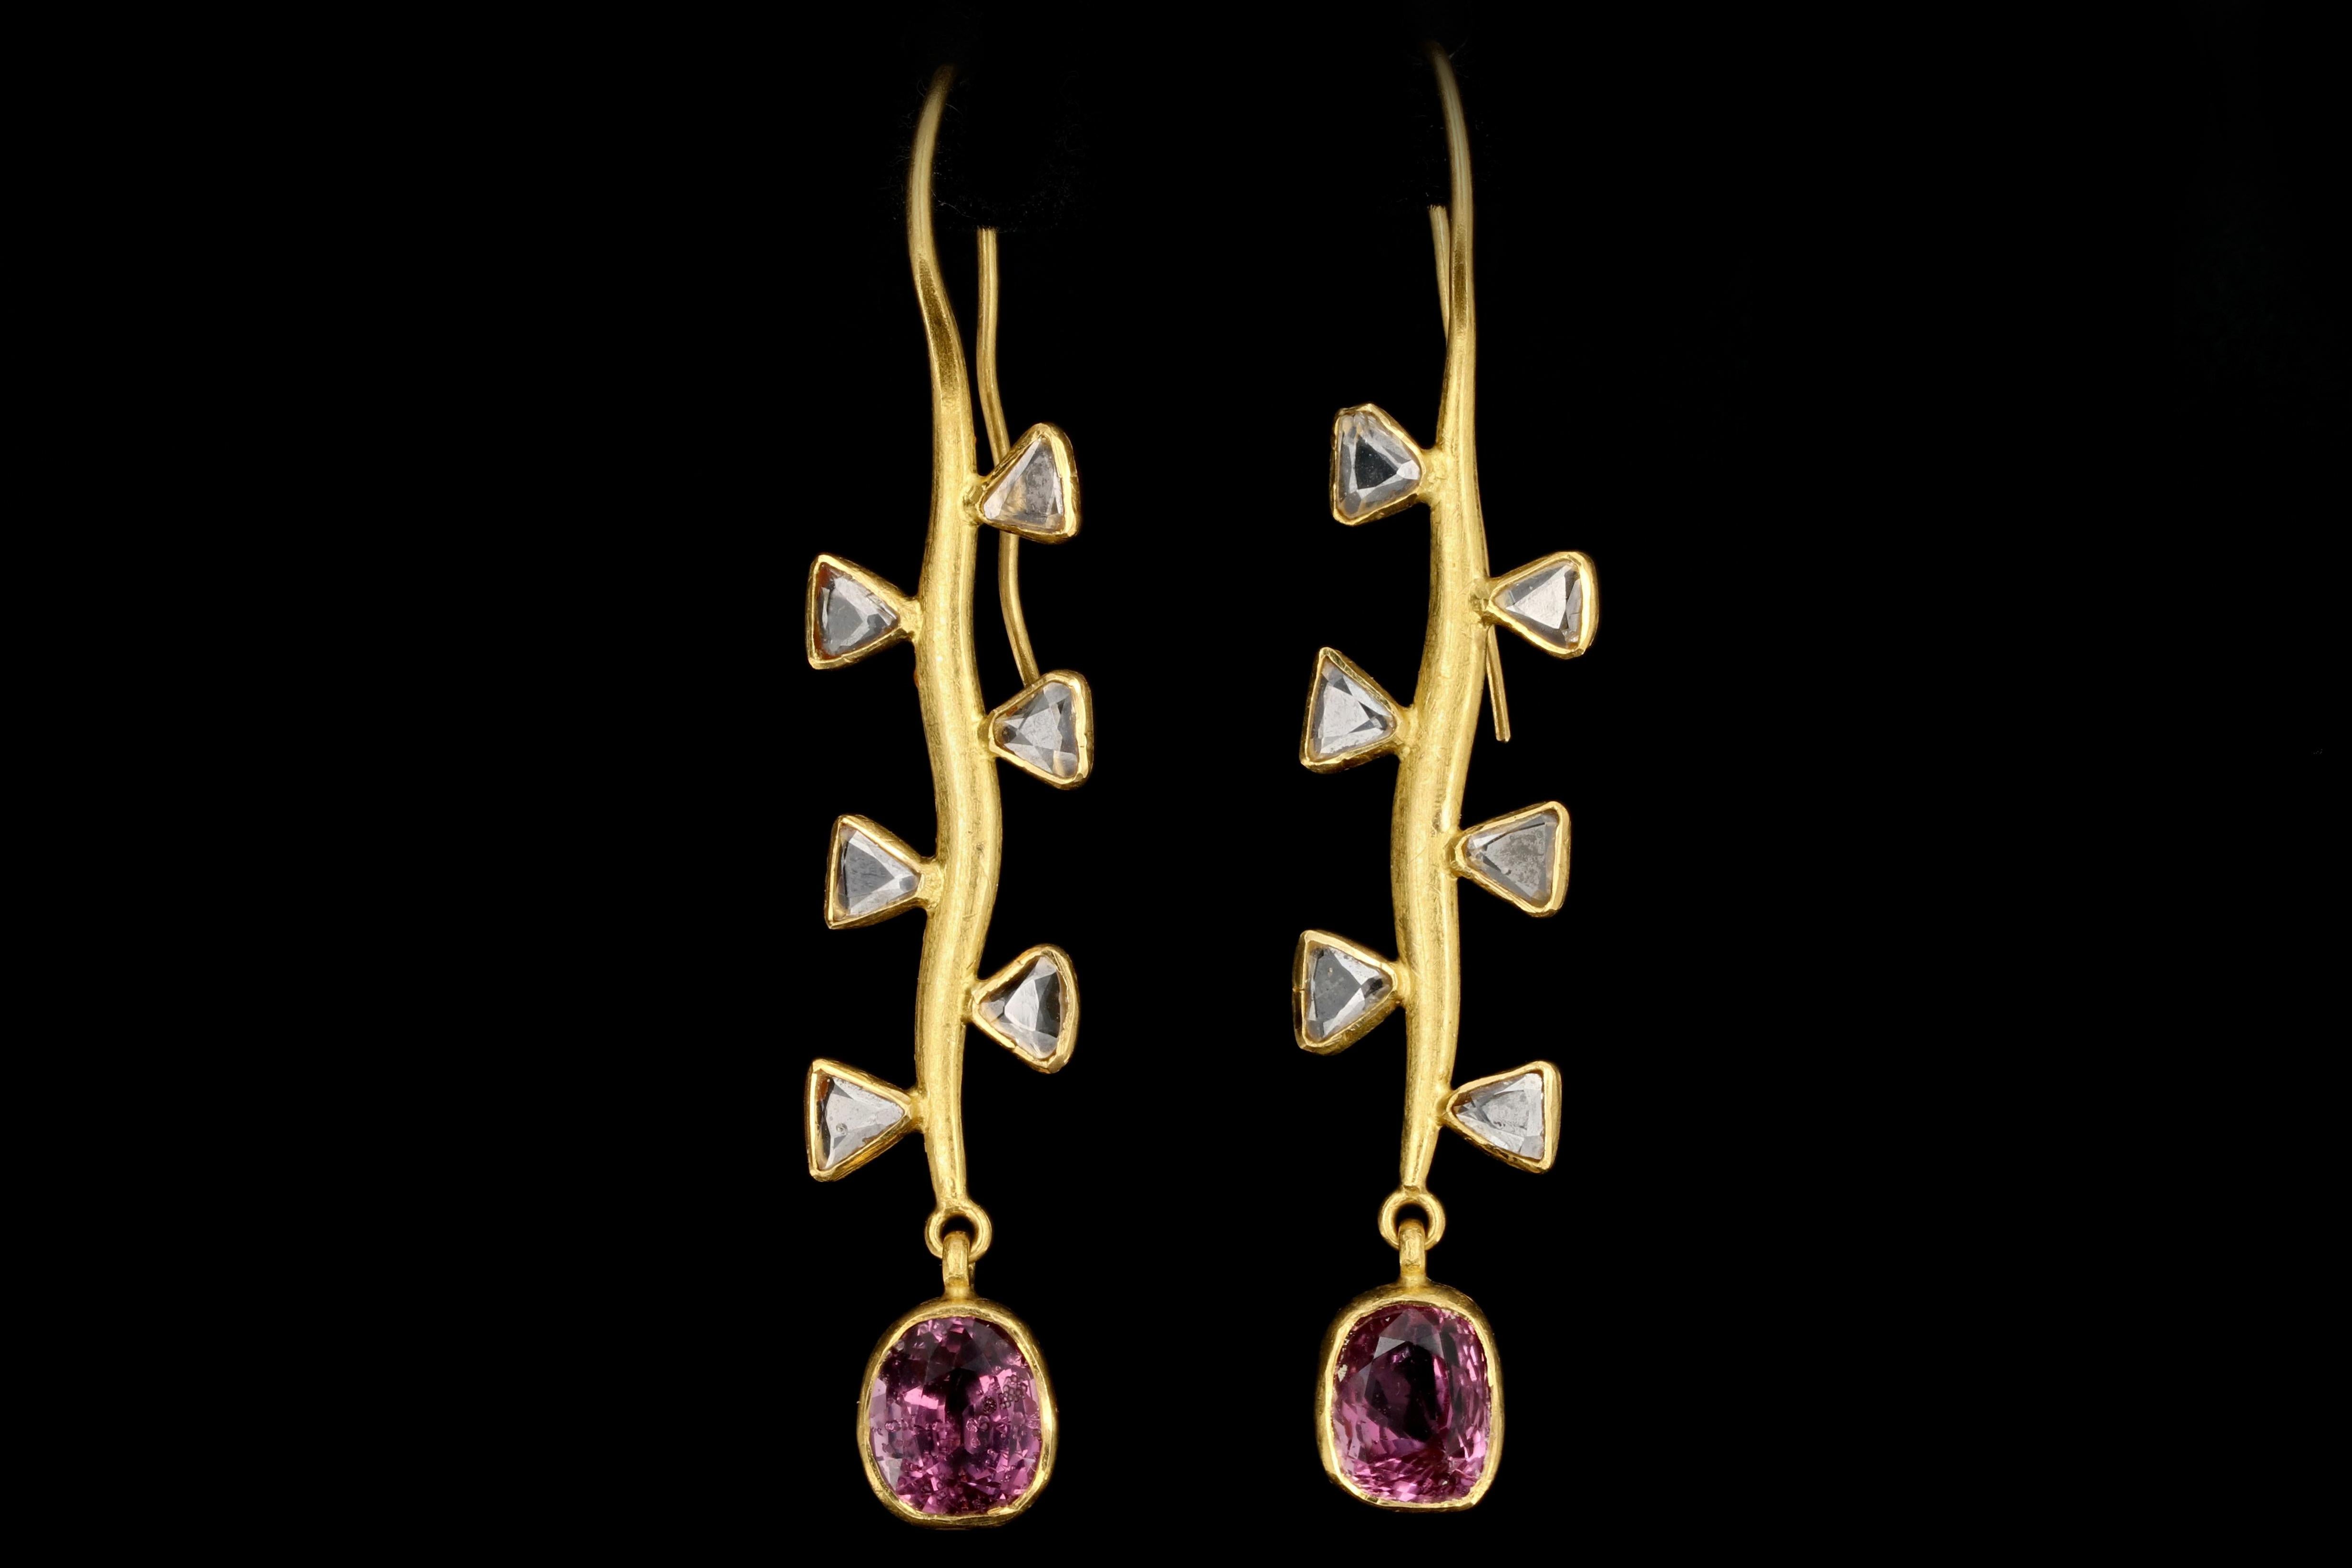 Era: Modern

Composition: 22K Yellow Gold

Primary Stone: Pink Spinel

Spinel Carat weight: 2.45 Carats & 2.74 Carats

Total Spinel Carat Weight: Approximately 5.2 Carats

Accent Stone: Trillion Rose Cut Diamonds

Trillion Cut Diamond Measurements: